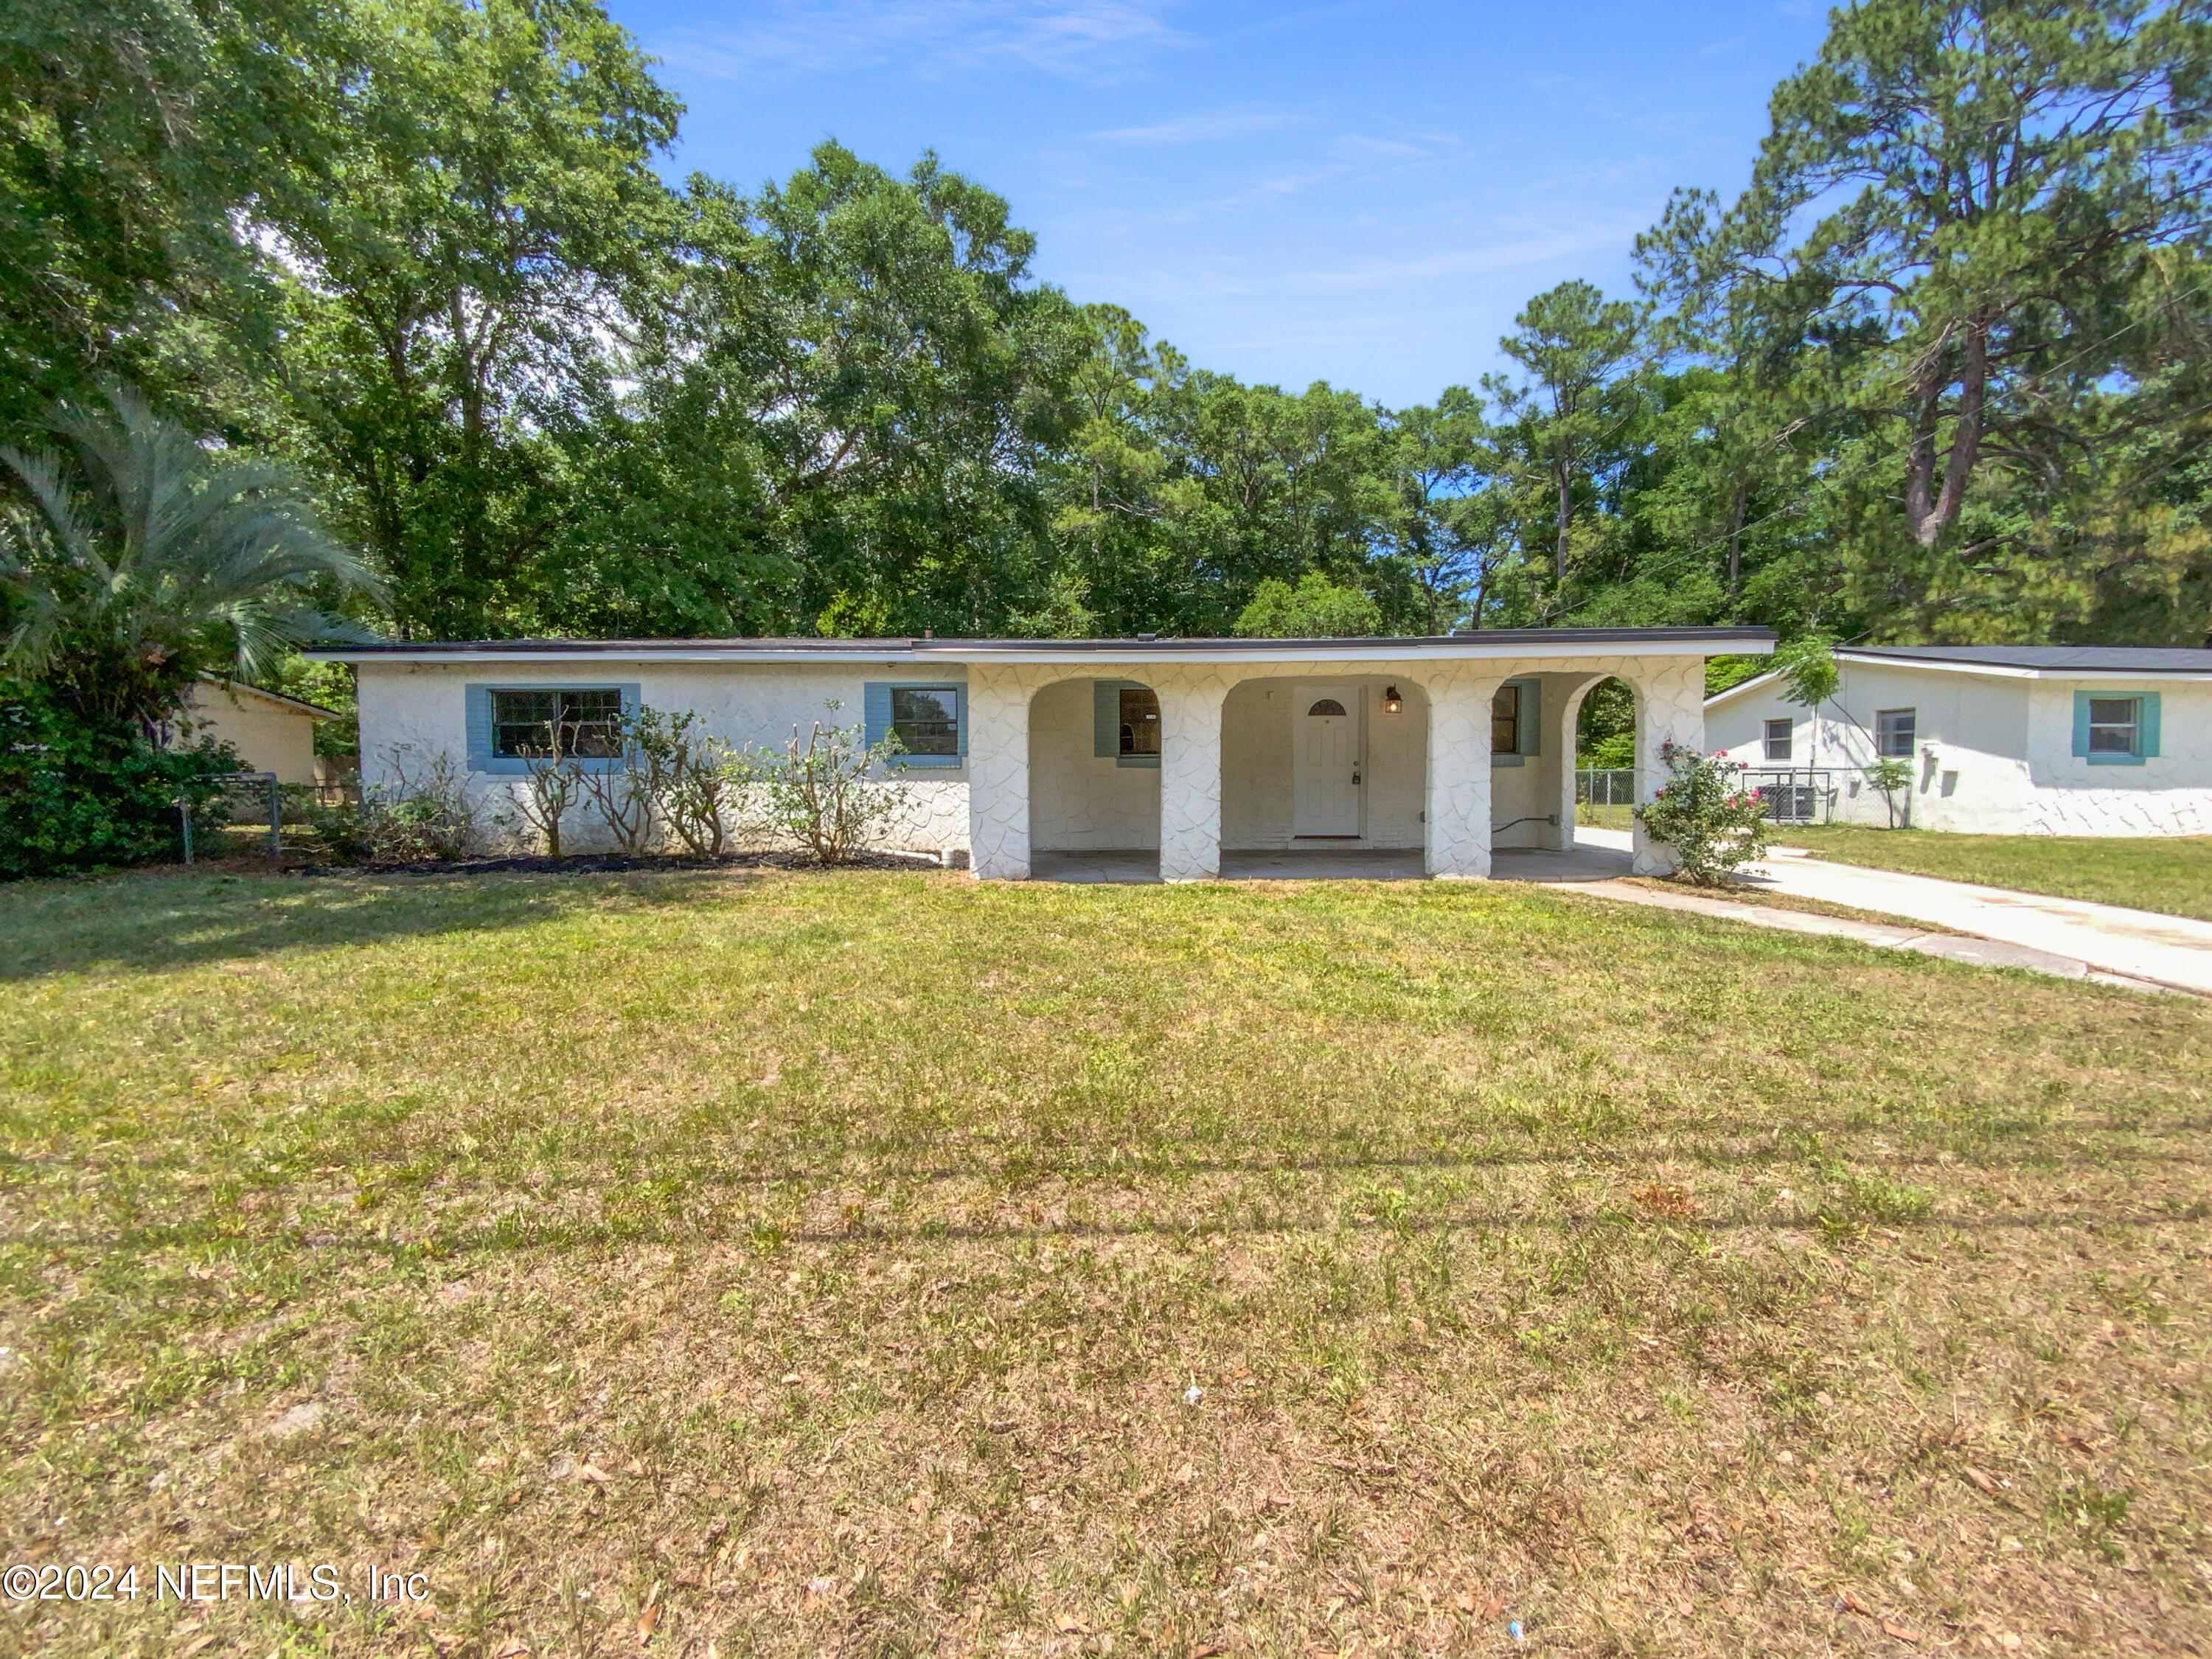 Jacksonville, FL home for sale located at 5103 Arrowsmith Road, Jacksonville, FL 32208